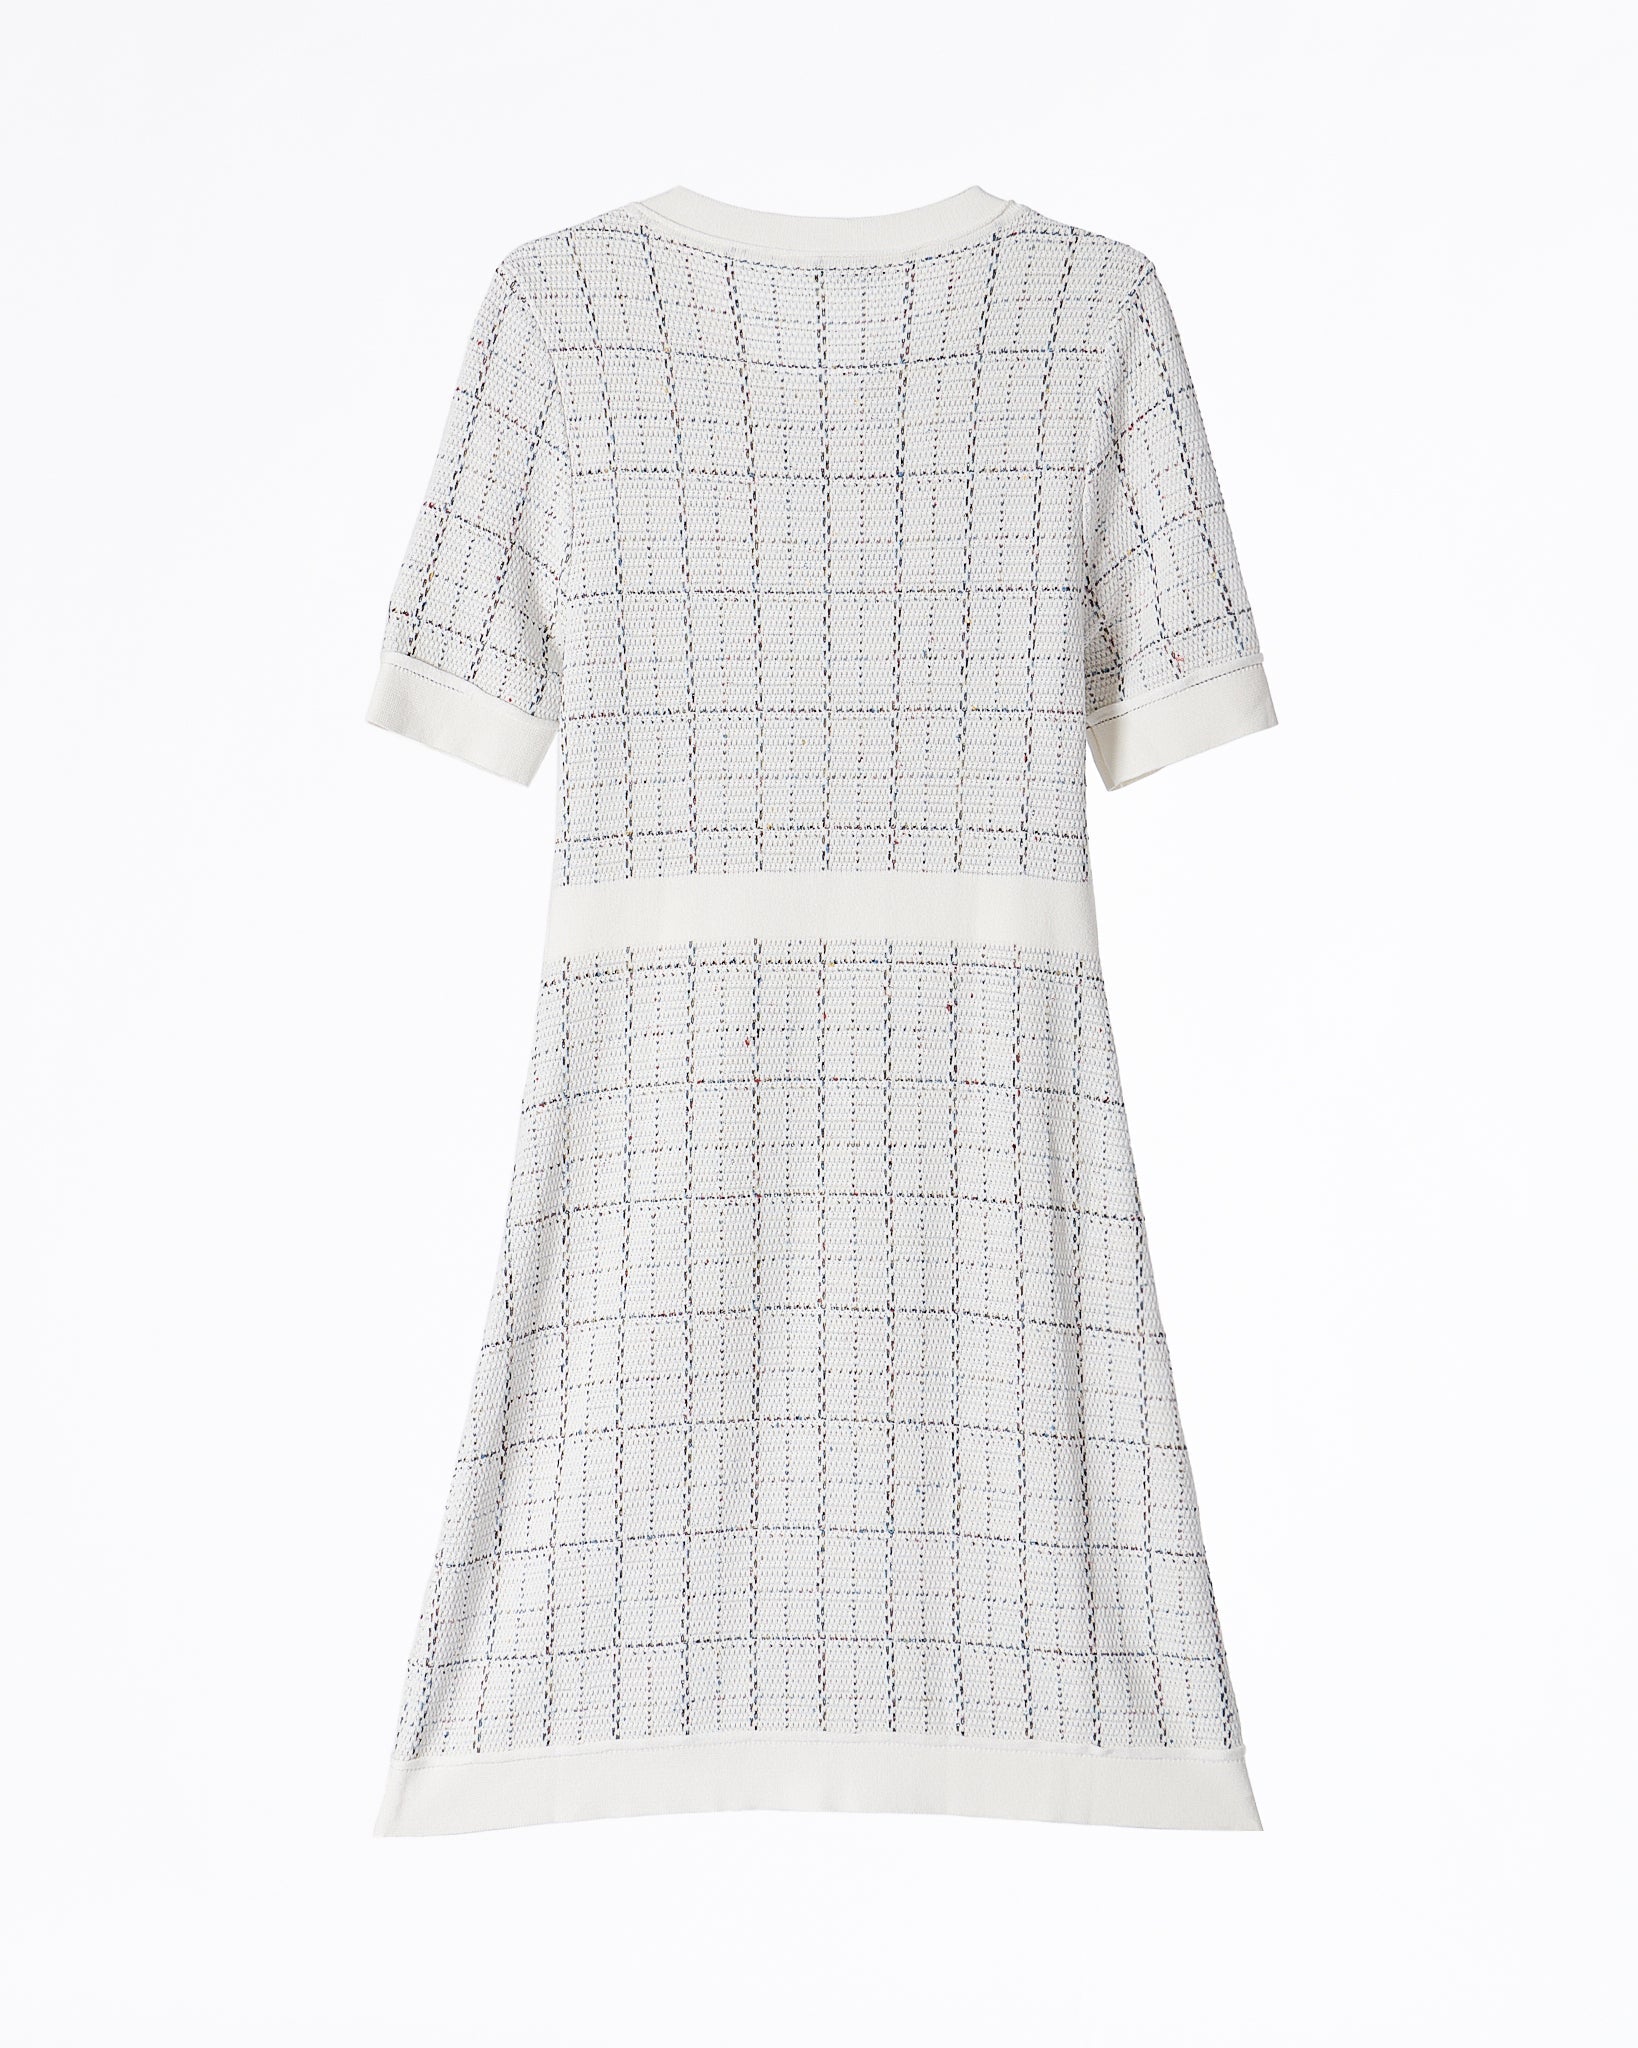 MOI OUTFIT-Tweed Lady White Dress 89.90